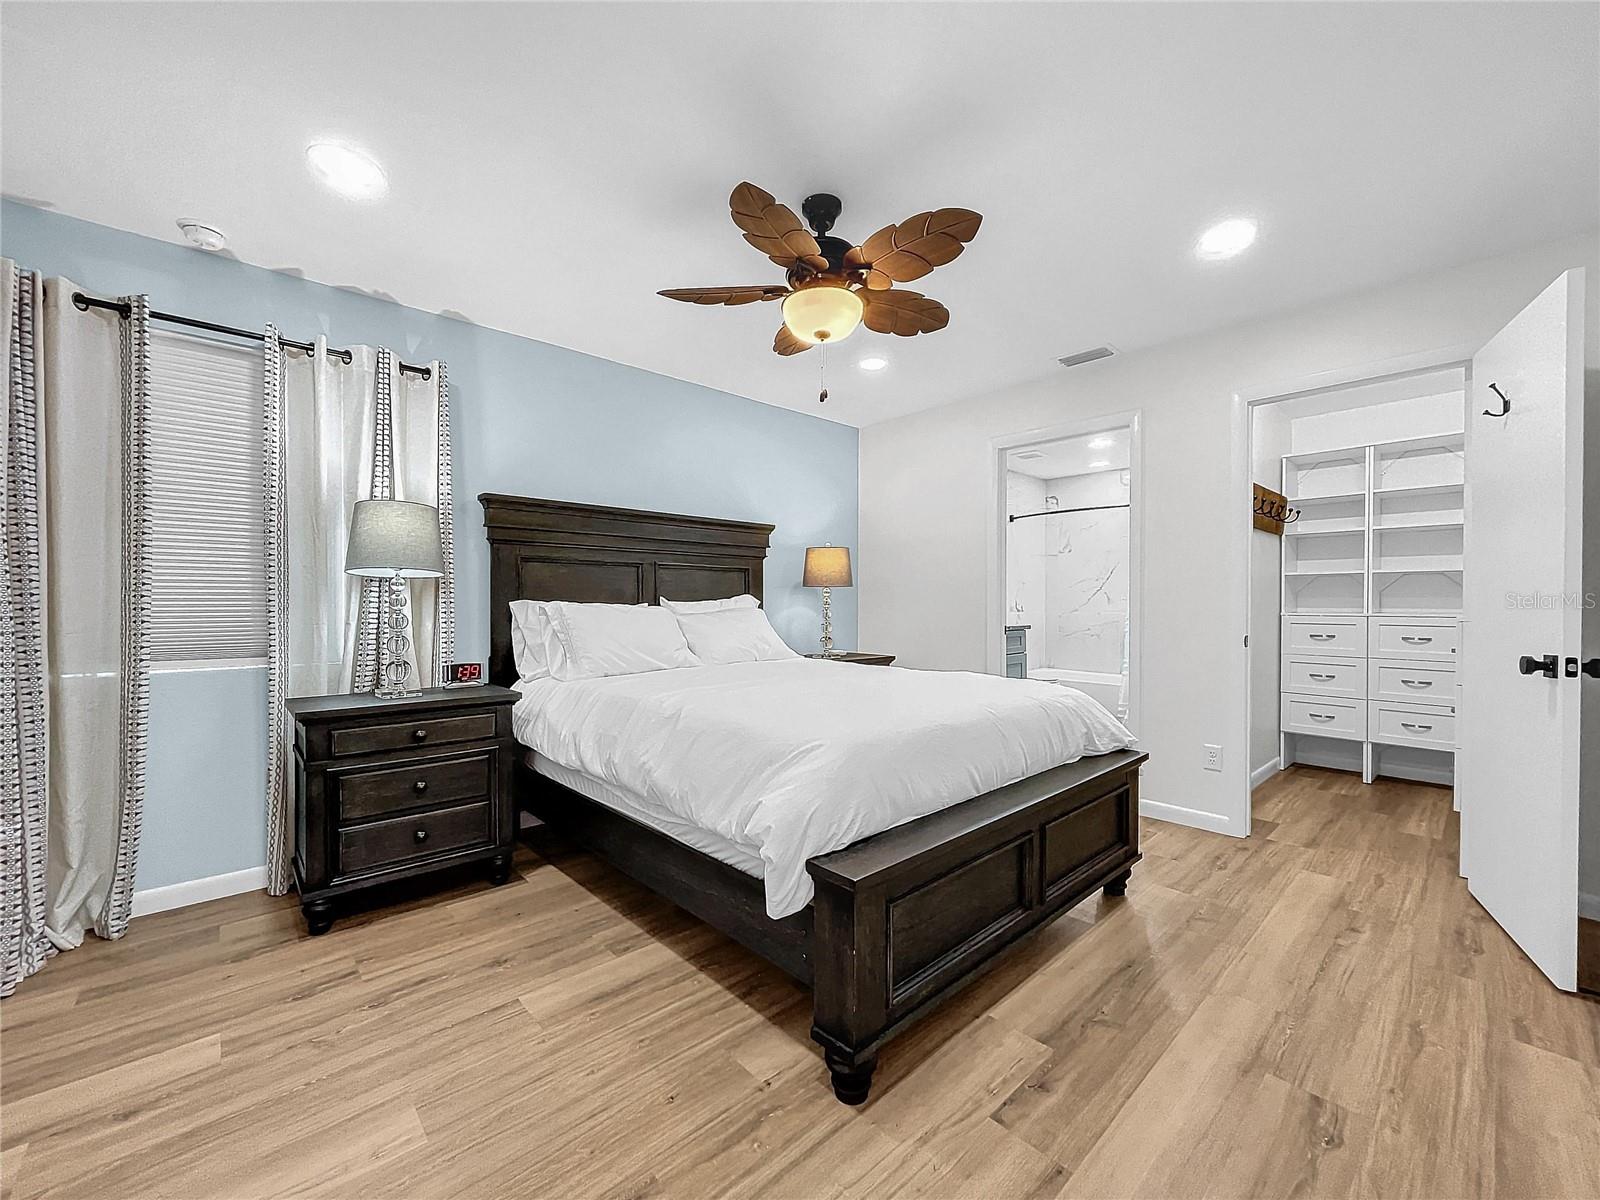 Master Bedroom with corner bedrooms, curtains and blinds, has ensuite and walk in closet